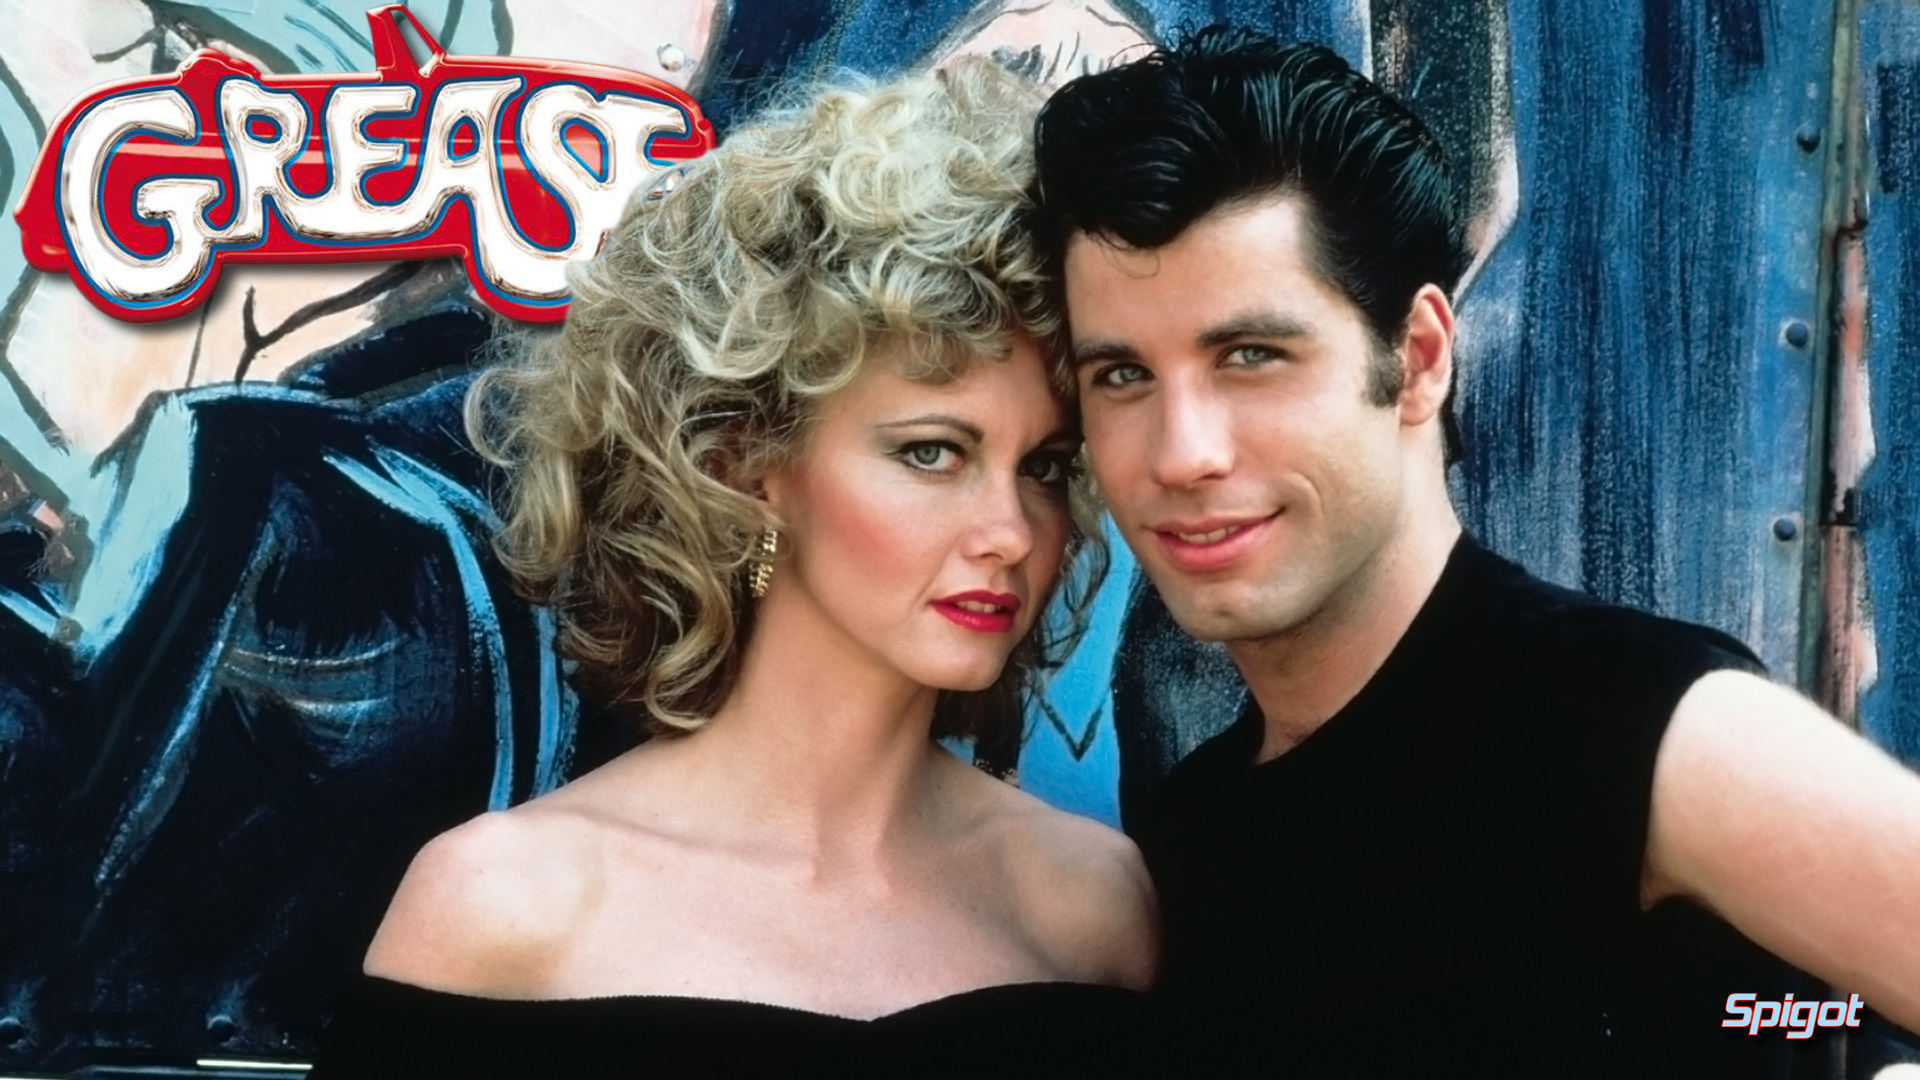 Grease #25